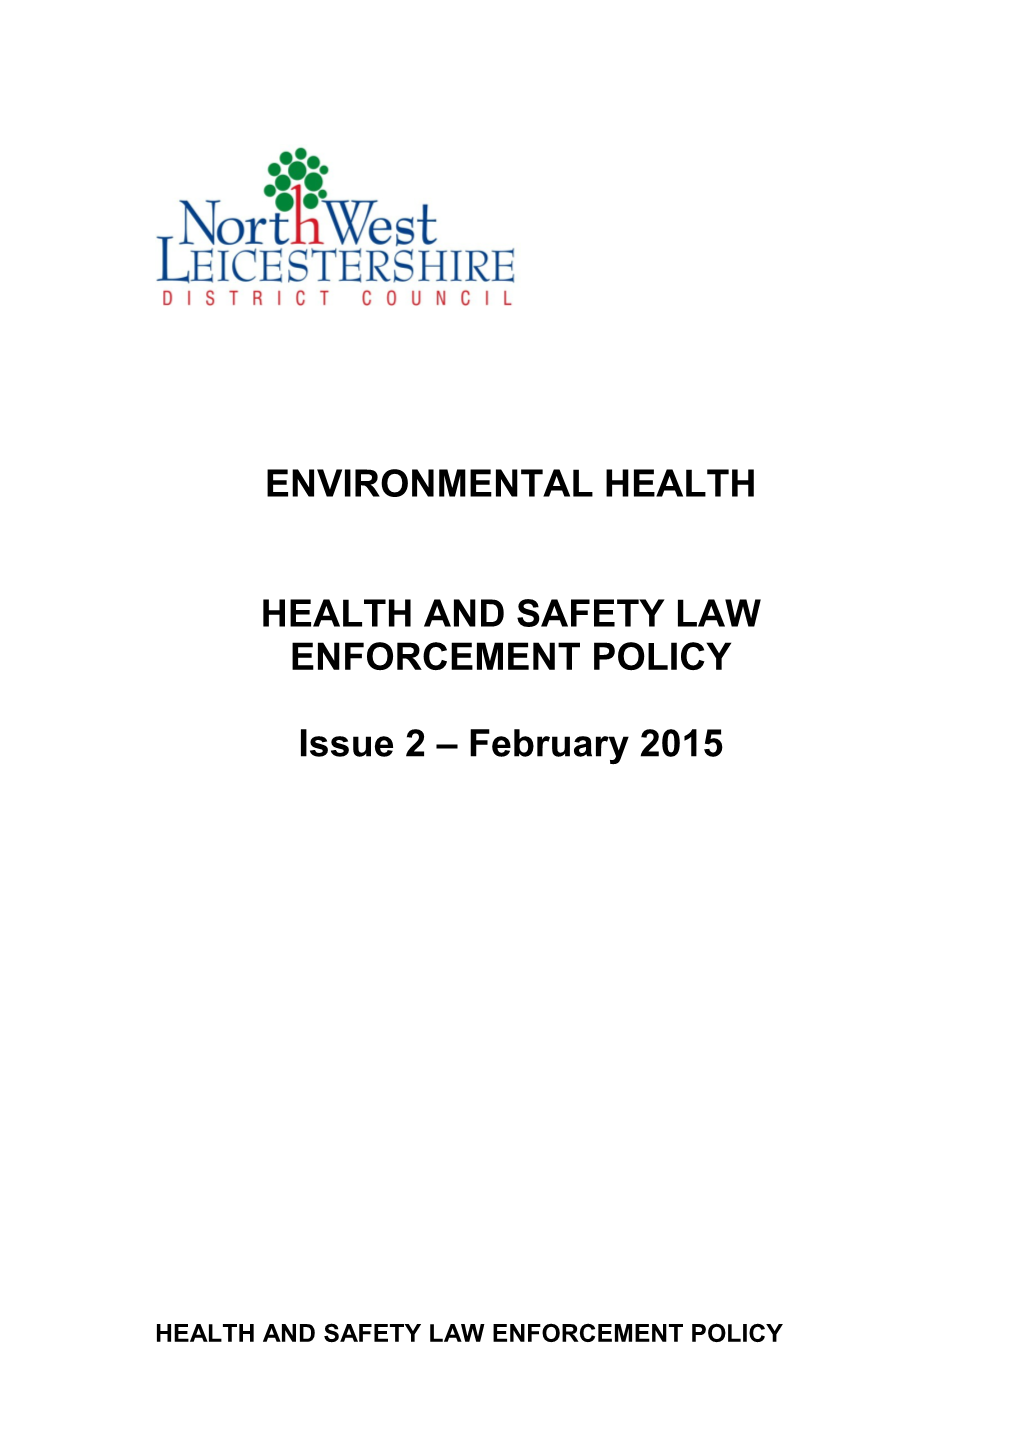 Health and Safety Enforcement Policy